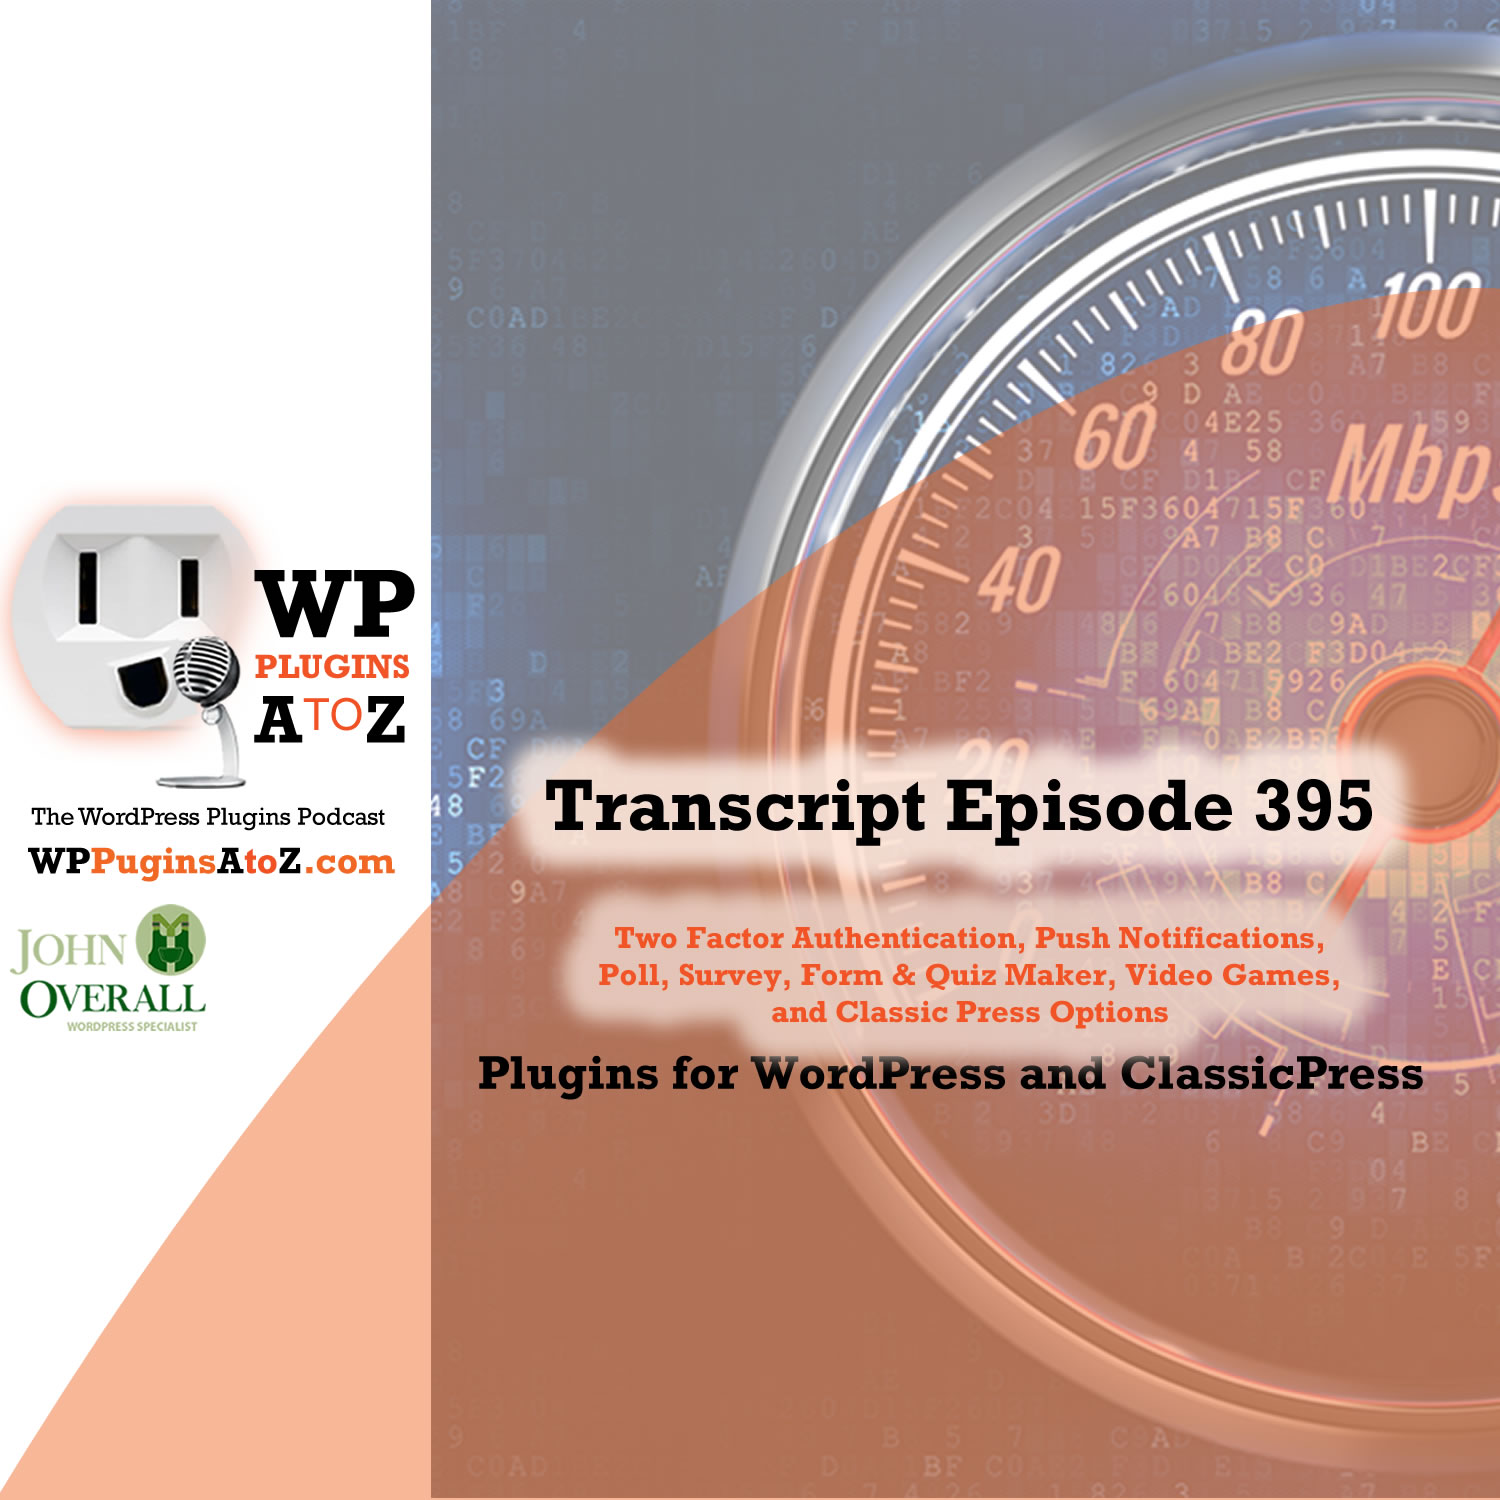 It's Episode 395 and I've got plugins for Two Factor Authentication, Push Notifications, Polls, Surveys & Quizzes, WordPress Game List, and ClassicPress. It's all coming up on WordPress Plugins A-Z!